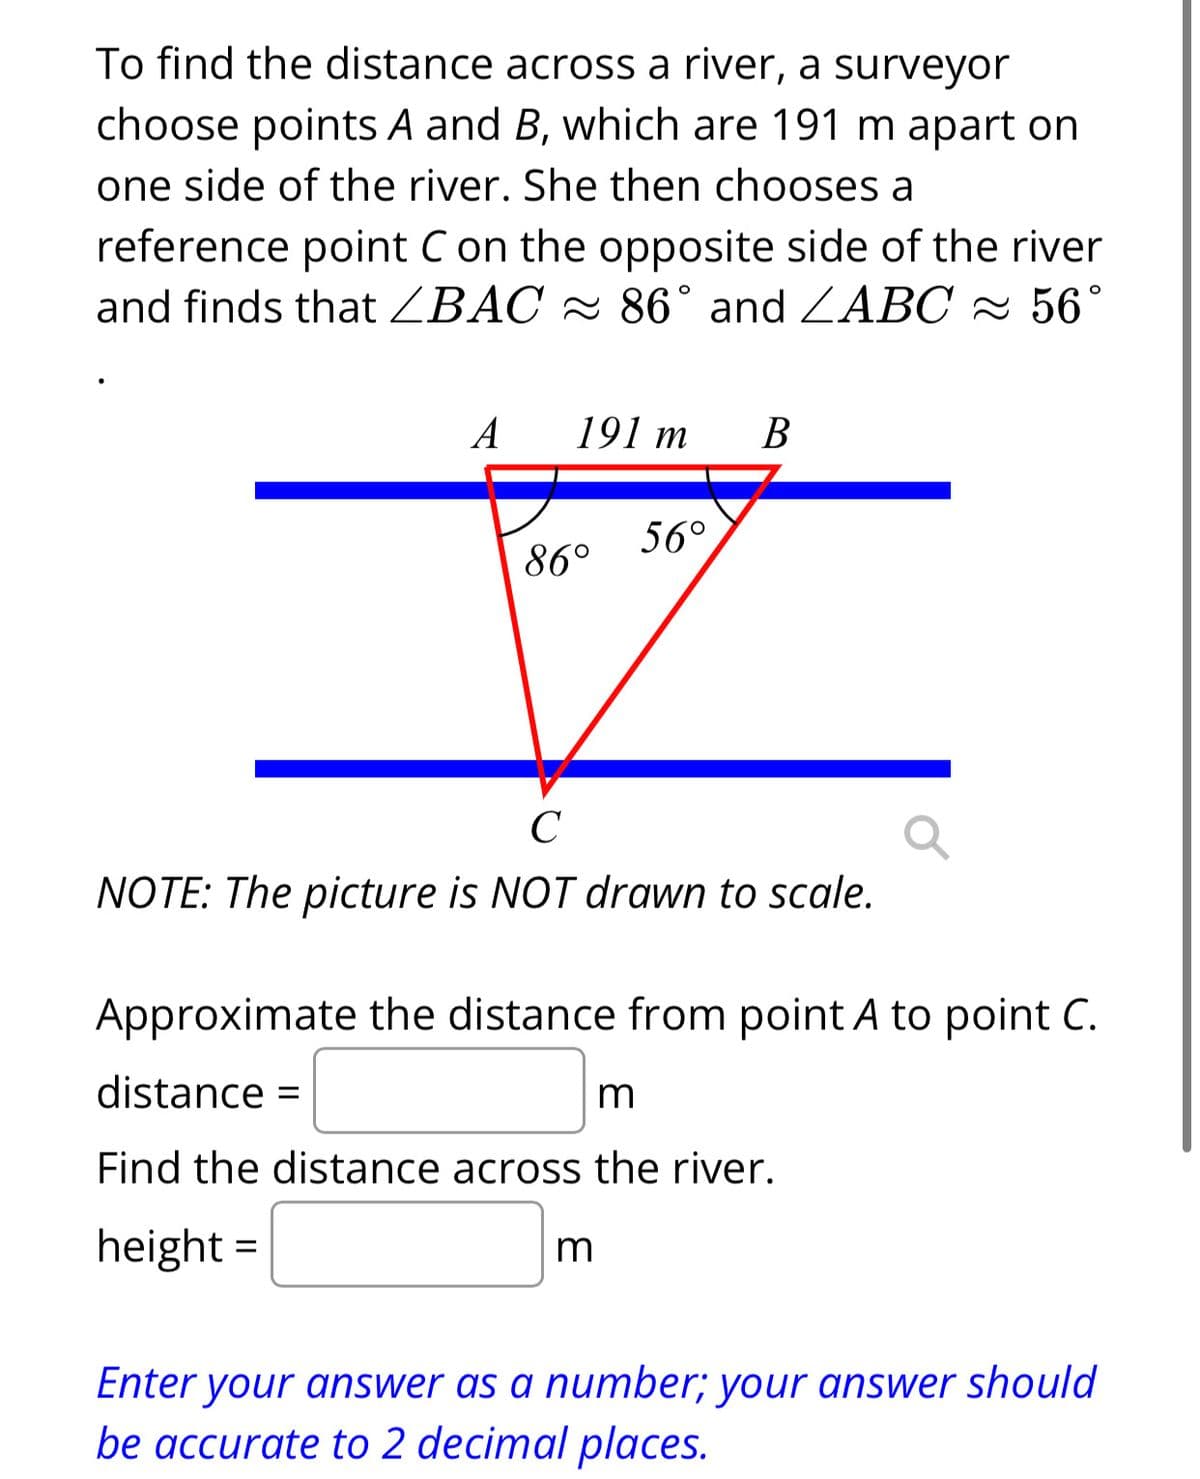 To find the distance across a river, a surveyor
choose points A and B, which are 191 m apart on
one side of the river. She then chooses a
reference point C on the opposite side of the river
and finds that ZBAC ≈ 86° and ZABC ≈ 56°
A
191 m
86°
56°
B
C
NOTE: The picture is NOT drawn to scale.
m
Approximate the distance from point A to point C.
distance =
m
Find the distance across the river.
height=
Enter your answer as a number; your answer should
be accurate to 2 decimal places.